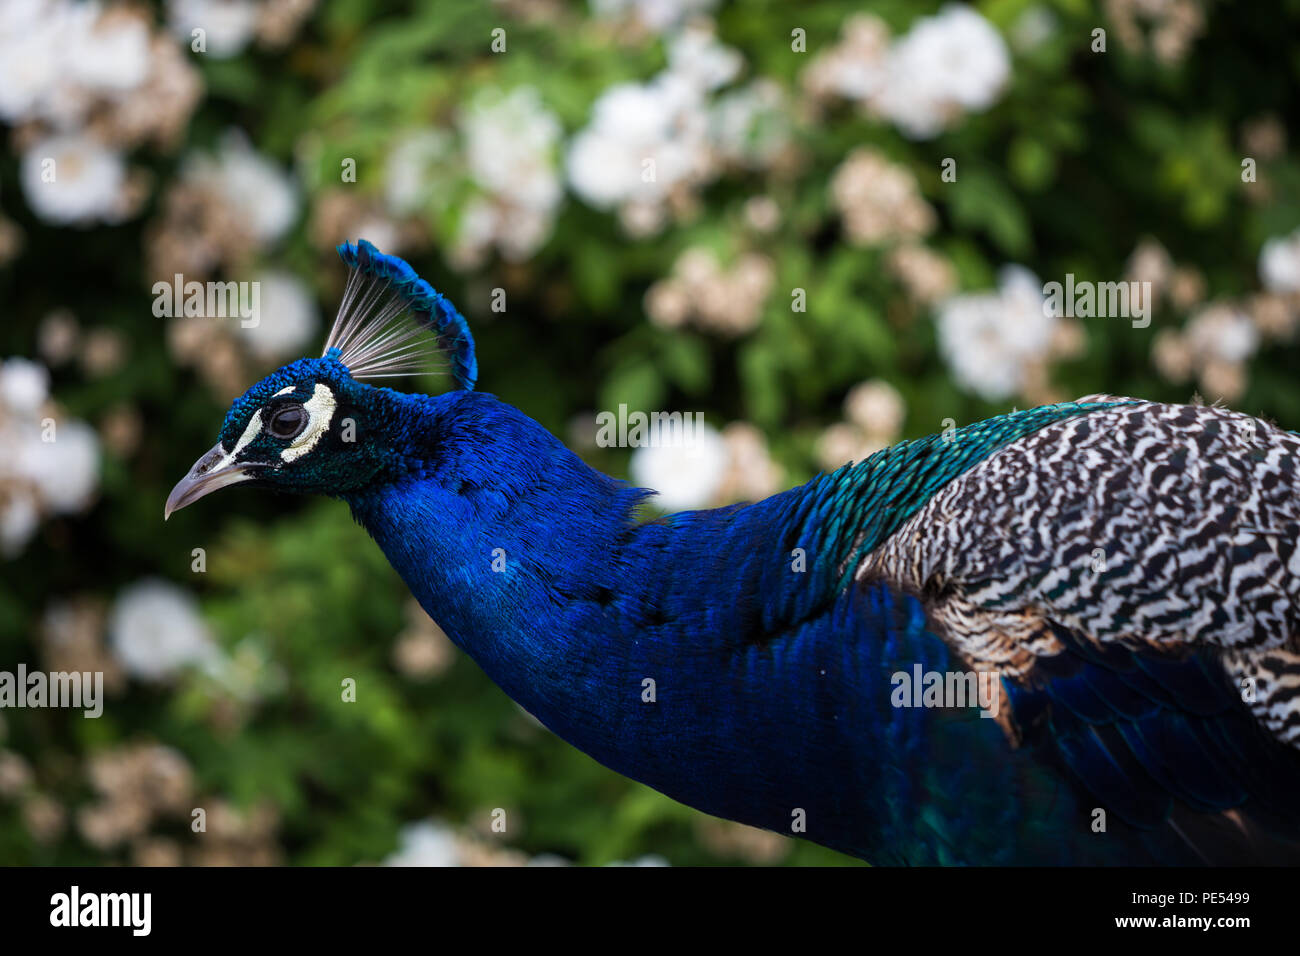 Peacock with outstretched neck against backdrop of green and white flora Stock Photo